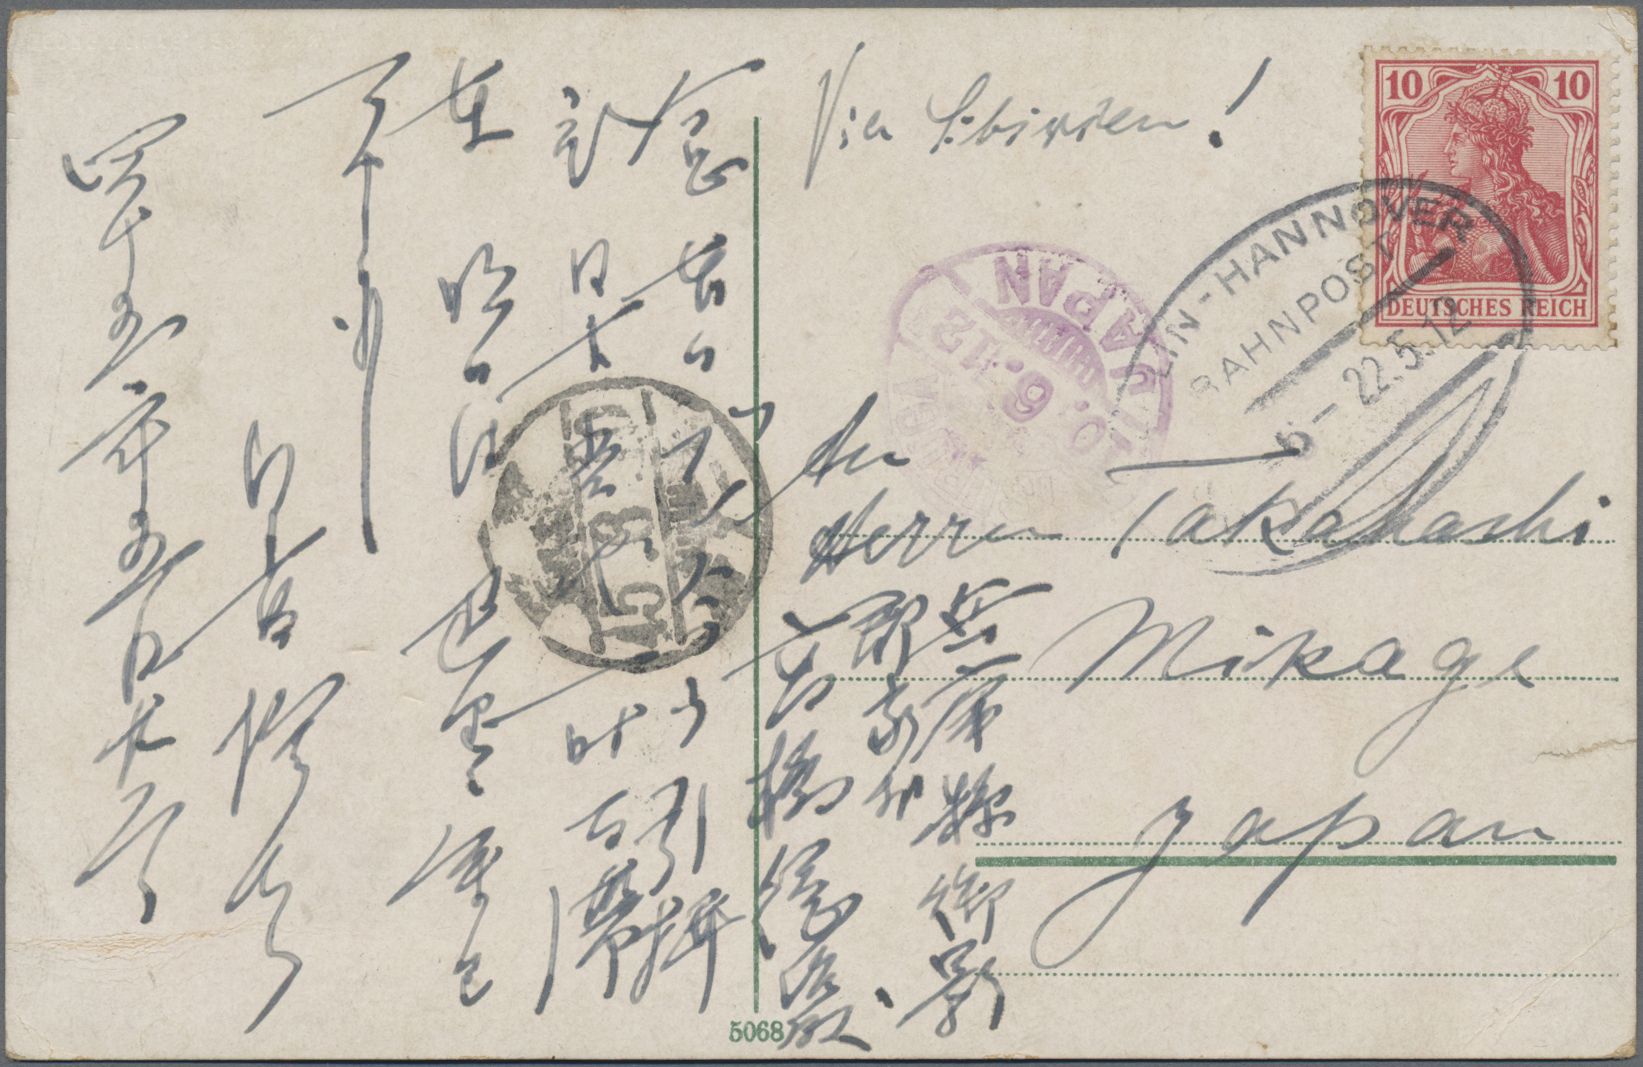 Lot 07448 - Japan - Incoming Mail  -  Auktionshaus Christoph Gärtner GmbH & Co. KG 56th AUCTION - Day 4